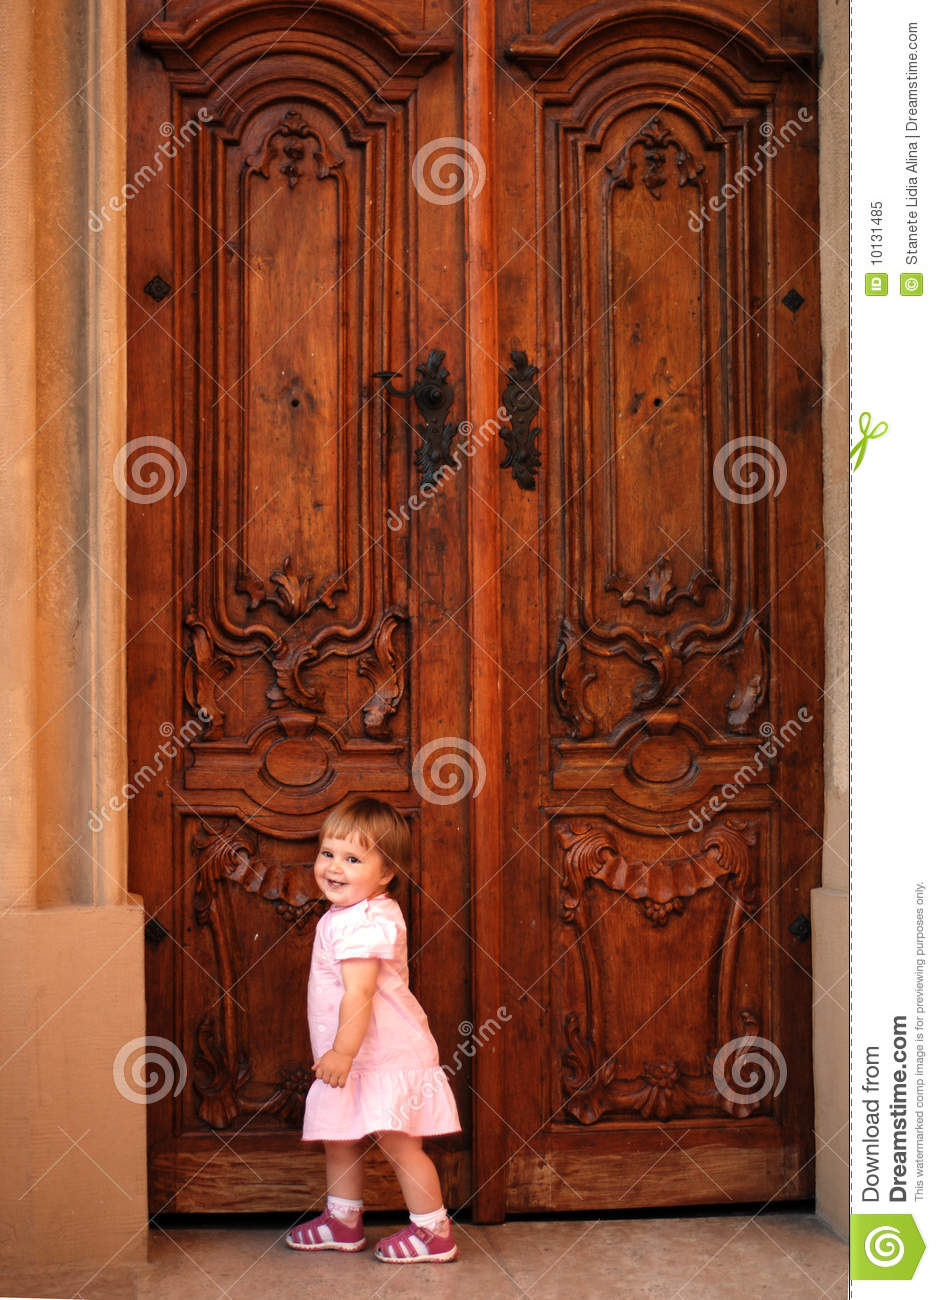 Little Girl Knocking At The Door Royalty Free Stock Photo   Image    